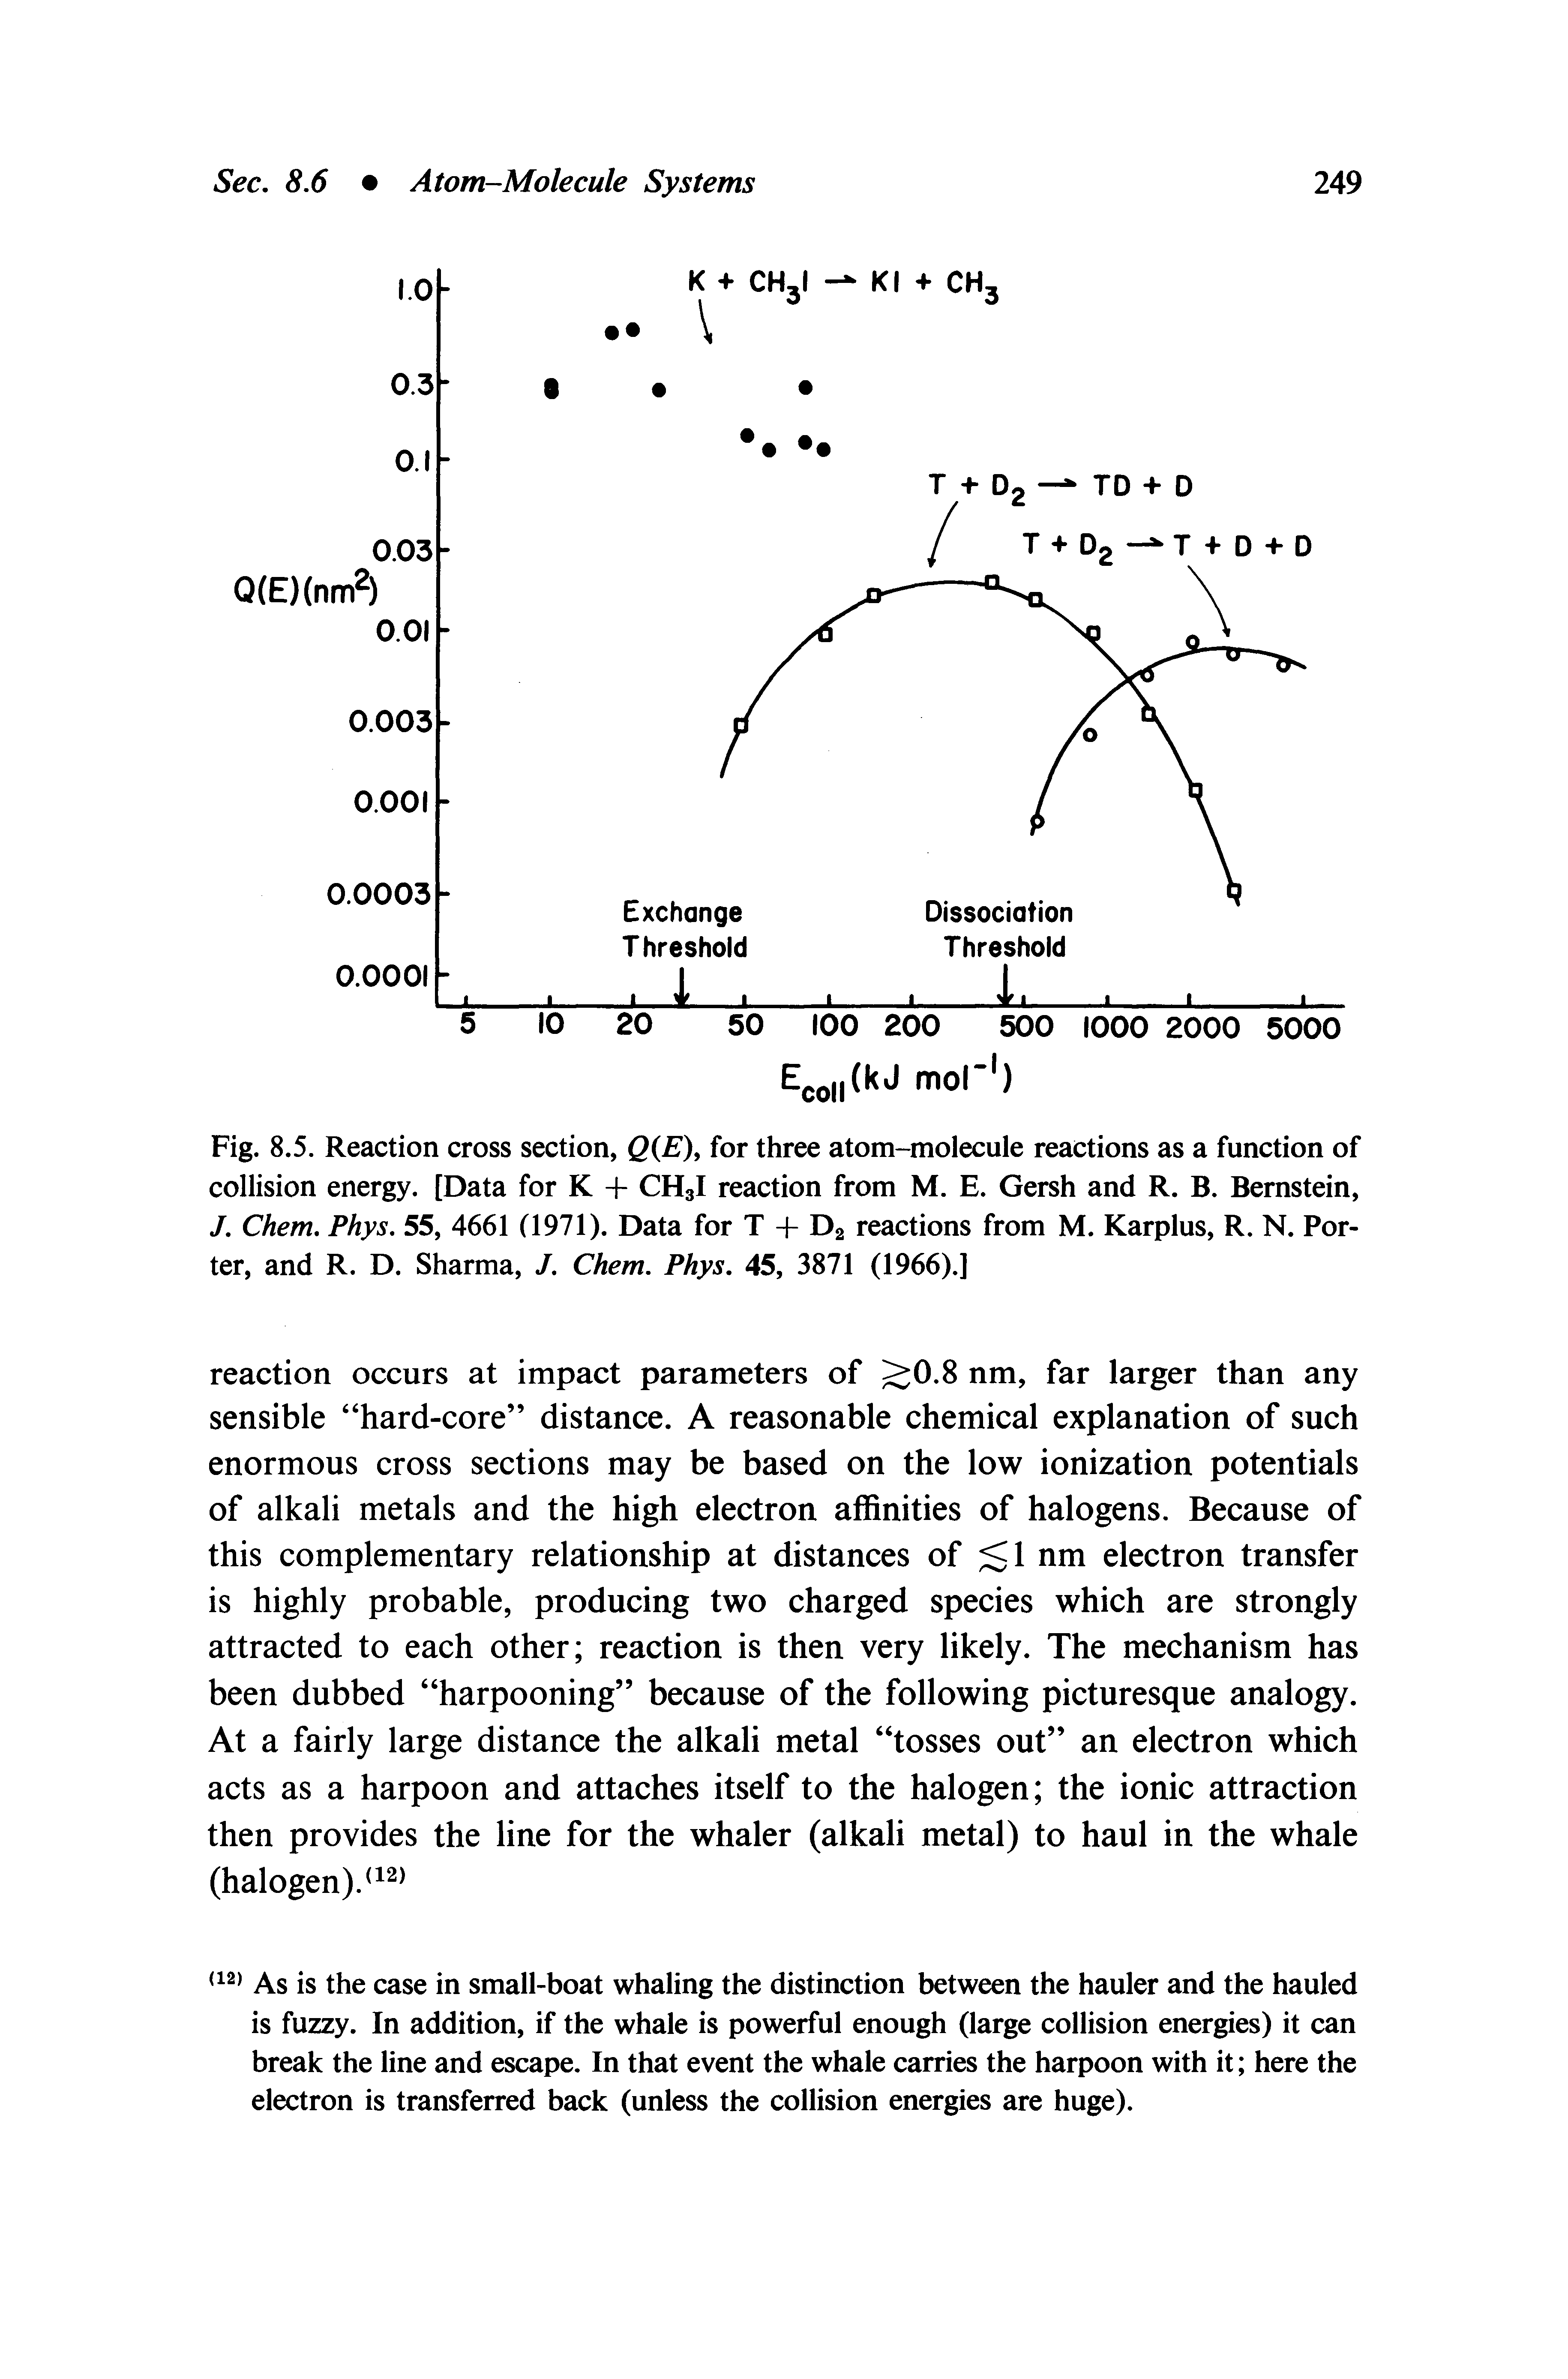 Fig. 8.5. Reaction cross section, Q E)y for three atom-molecule reactions as a function of collision energy. [Data for K + CH3I reaction from M. E. Gersh and R. B. Bernstein, J. Chem. Phys. 55, 4661 (1971). Data for T + Dg reactions from M. Karplus, R. N. Porter, and R. D. Sharma, J. Chem. Phys. 45, 3871 (1966).]...